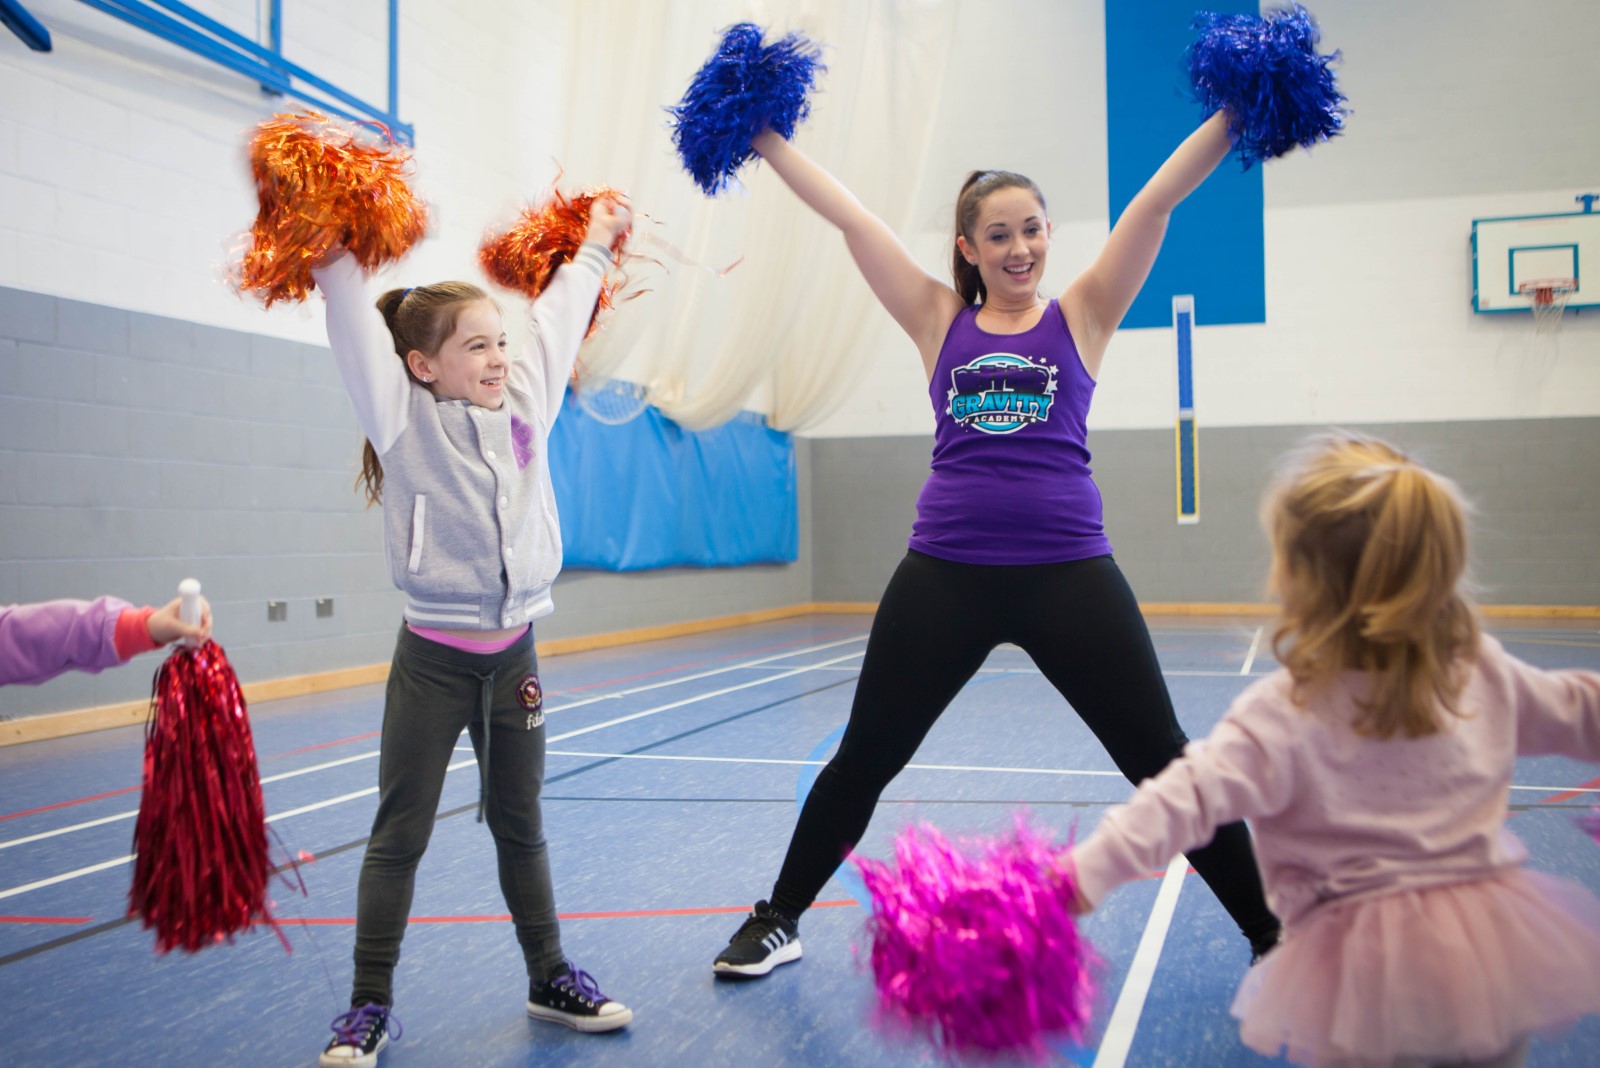 Lady with pompoms teaching a group of children.jpg